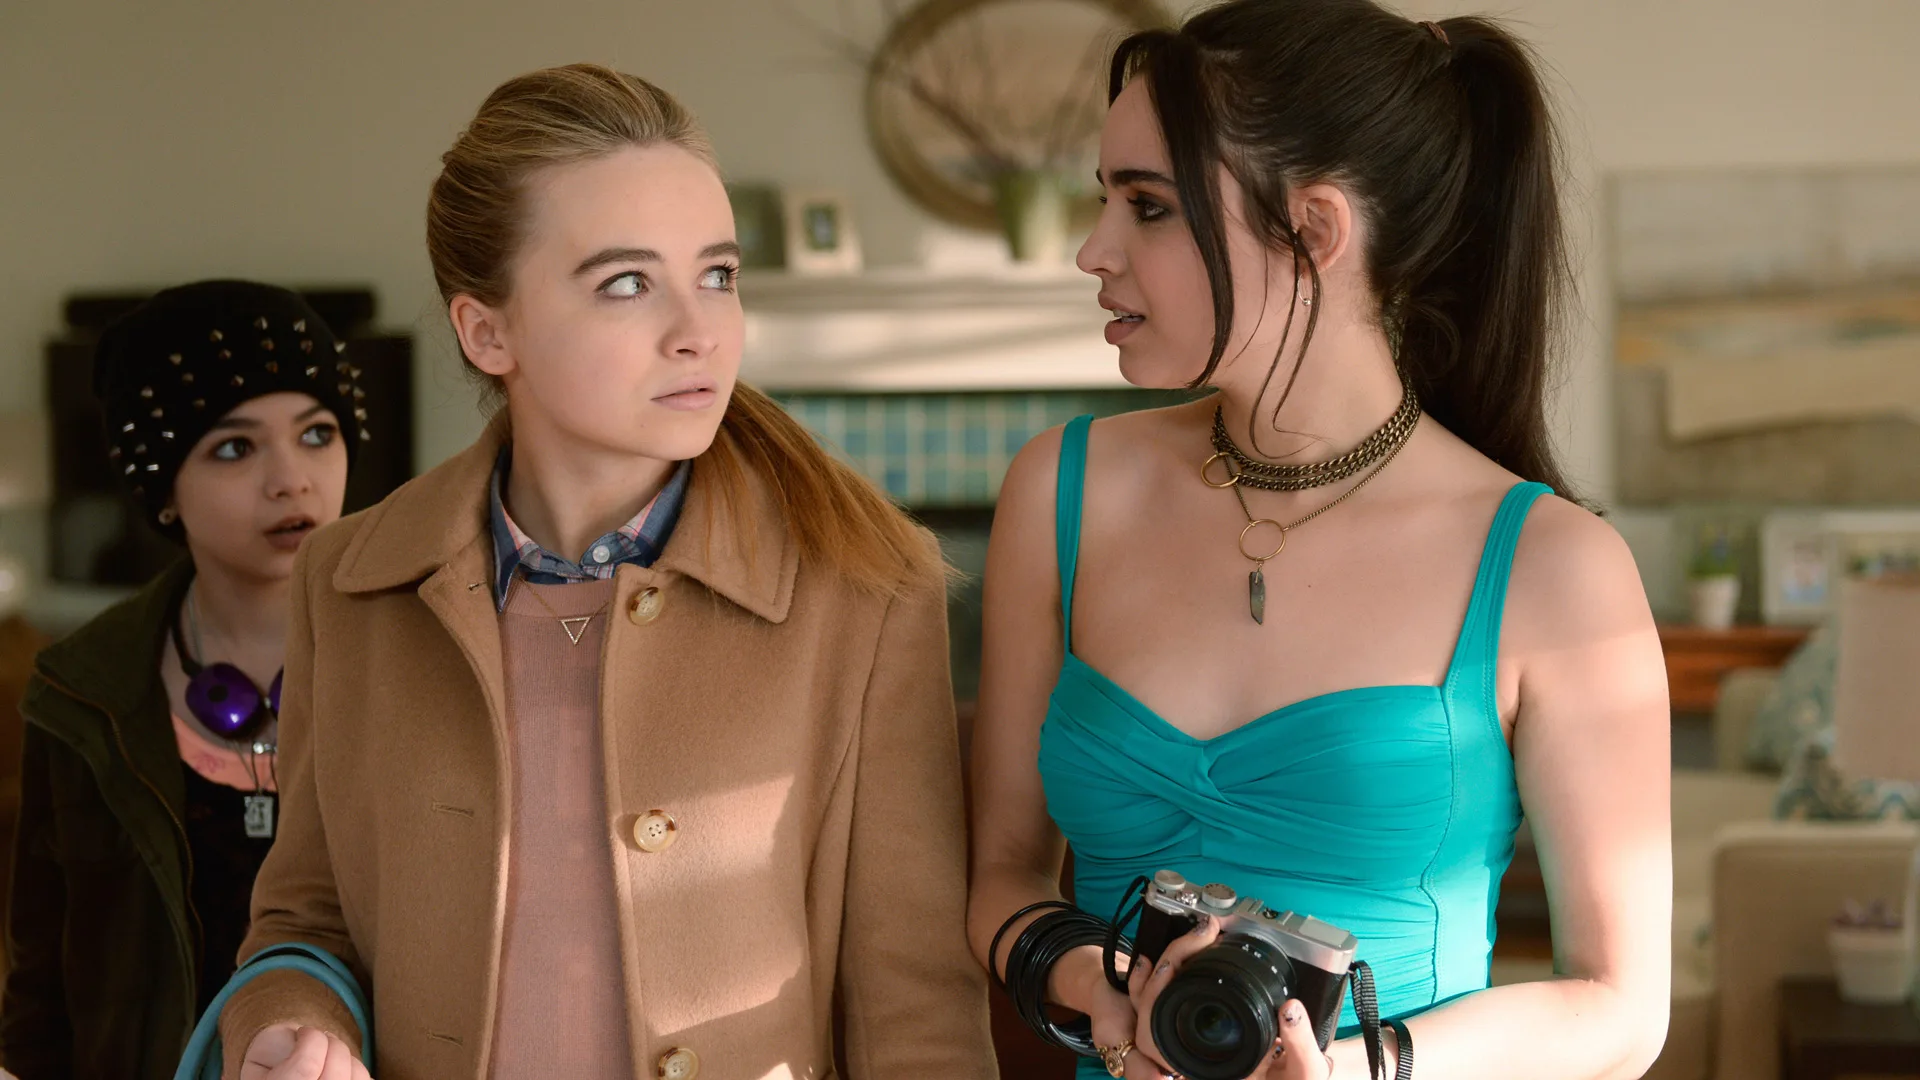 A photo of Sabrina Carpenter and Sofia Carson in a tense discussion. Sofia is wearing a blue top and Sabrina a beige coat.